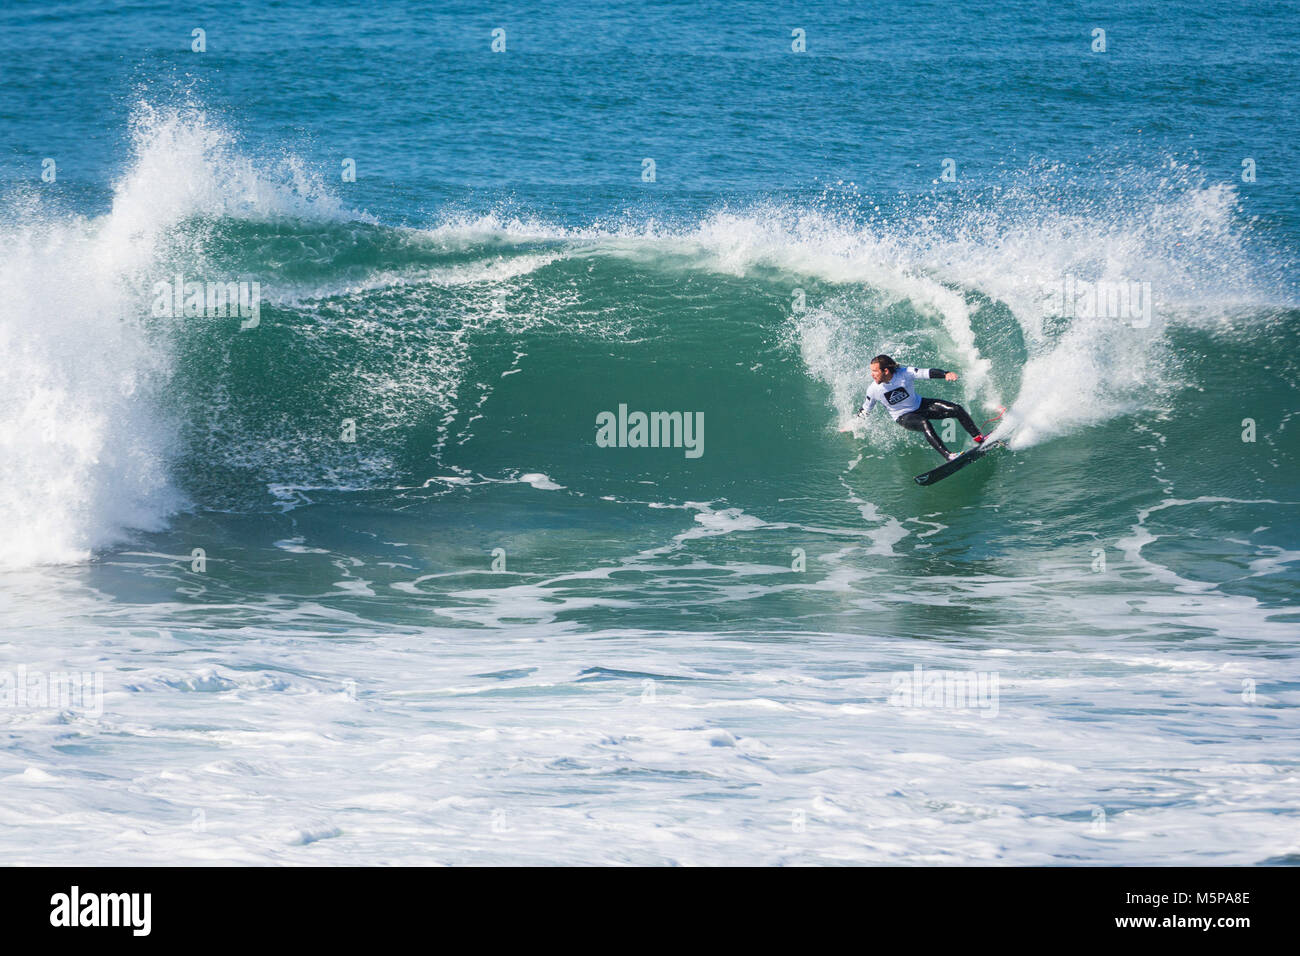 February 24, 2018 - NazarÃ, Leiria, Portugal - Surfer: William Aliotti, French seen at the CapÃtulo Perfeito event...An event that brings together some of the best free surfers in the country and the world in a tube competition at Praia do Norte, NazarÃ©. It happened on the 24th of February and the winner was William Aliotti. (Credit Image: © Capitulo Perfeito-010.jpg/SOPA Images via ZUMA Wire) Stock Photo